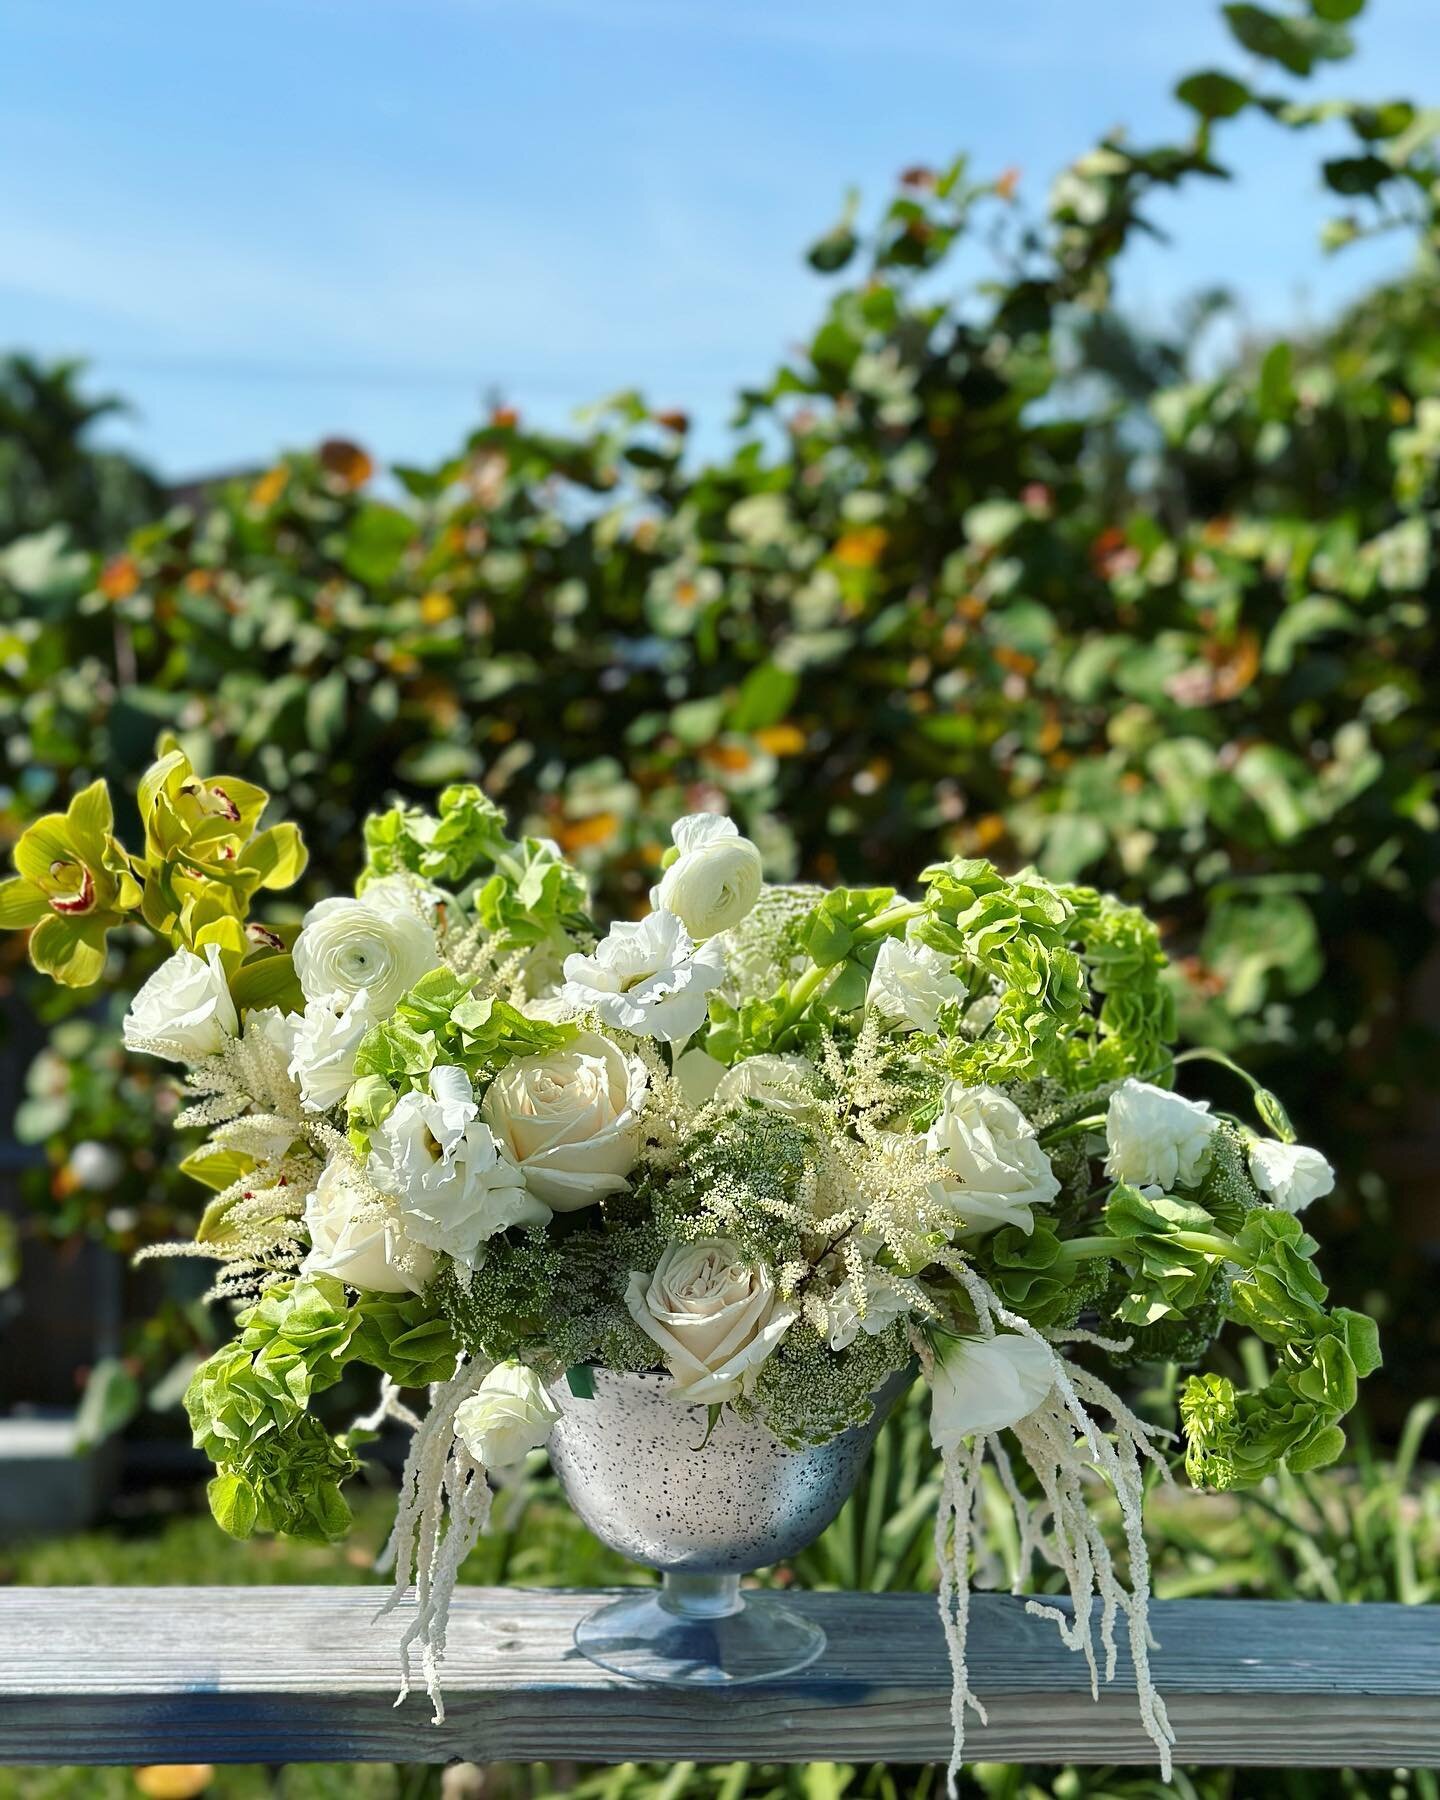 There's nothing classier than a white and green flower arrangement (and how about those Bells of Ireland🤤🍀?!)